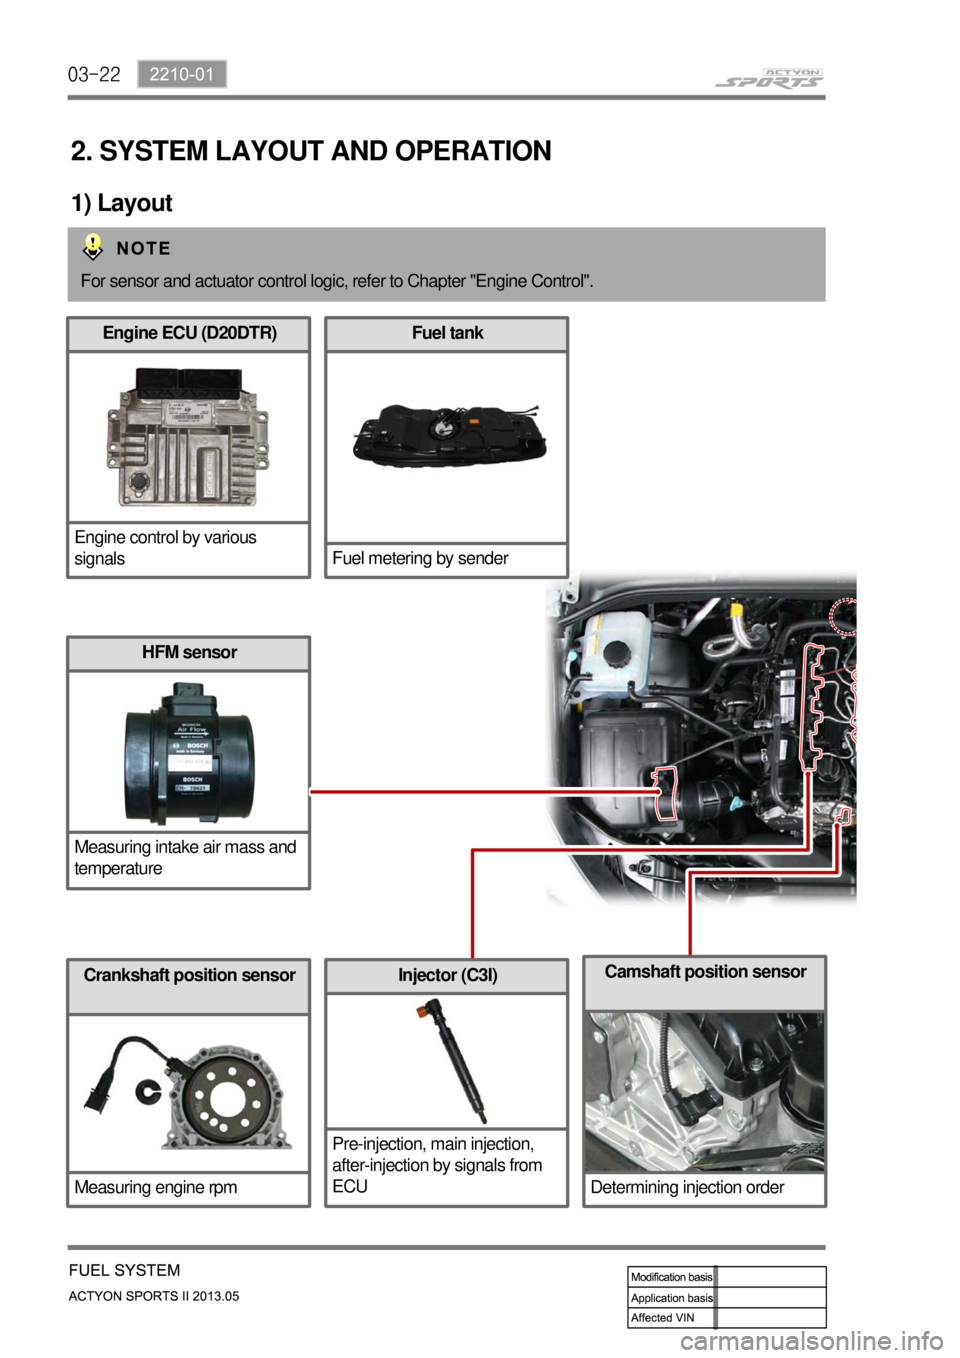 SSANGYONG NEW ACTYON SPORTS 2013  Service Manual 03-22
2. SYSTEM LAYOUT AND OPERATION
1) Layout
For sensor and actuator control logic, refer to Chapter "Engine Control".
Engine ECU (D20DTR)
Engine control by various 
signalsFuel tank
Fuel metering b